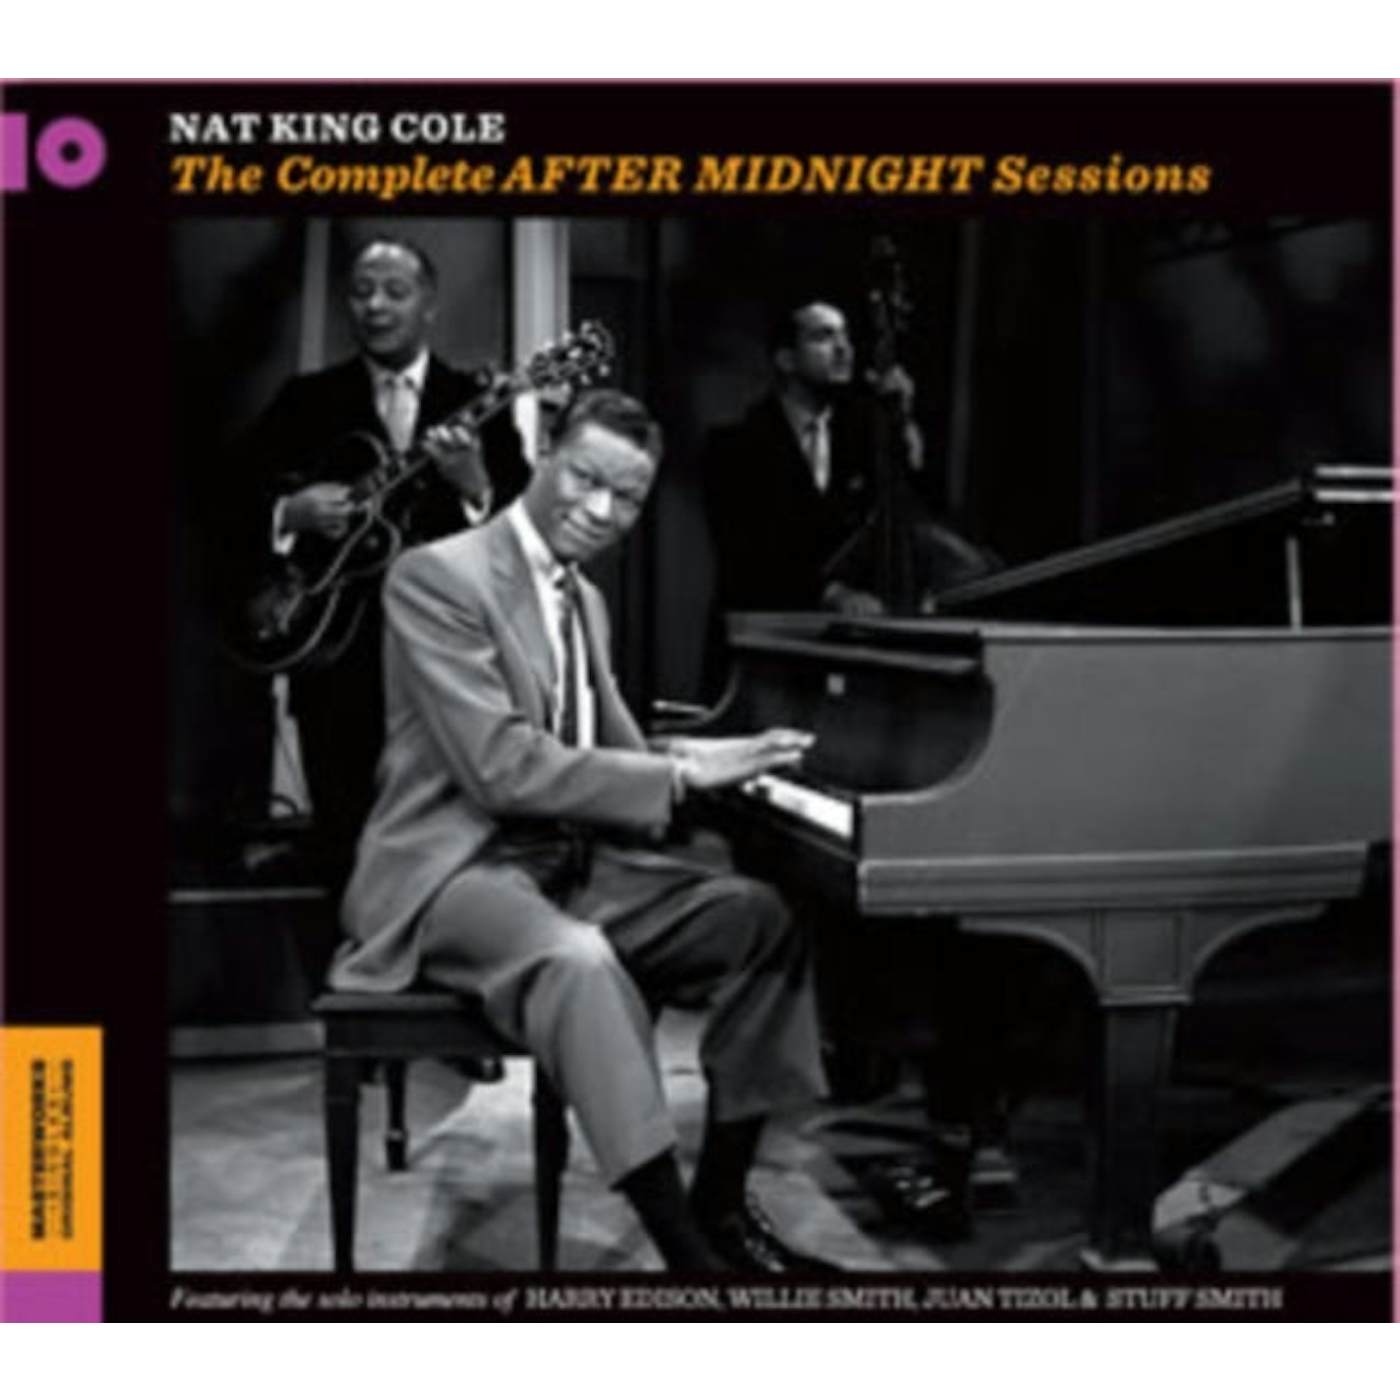 Nat King Cole CD - The Complete After Midnight Sessions